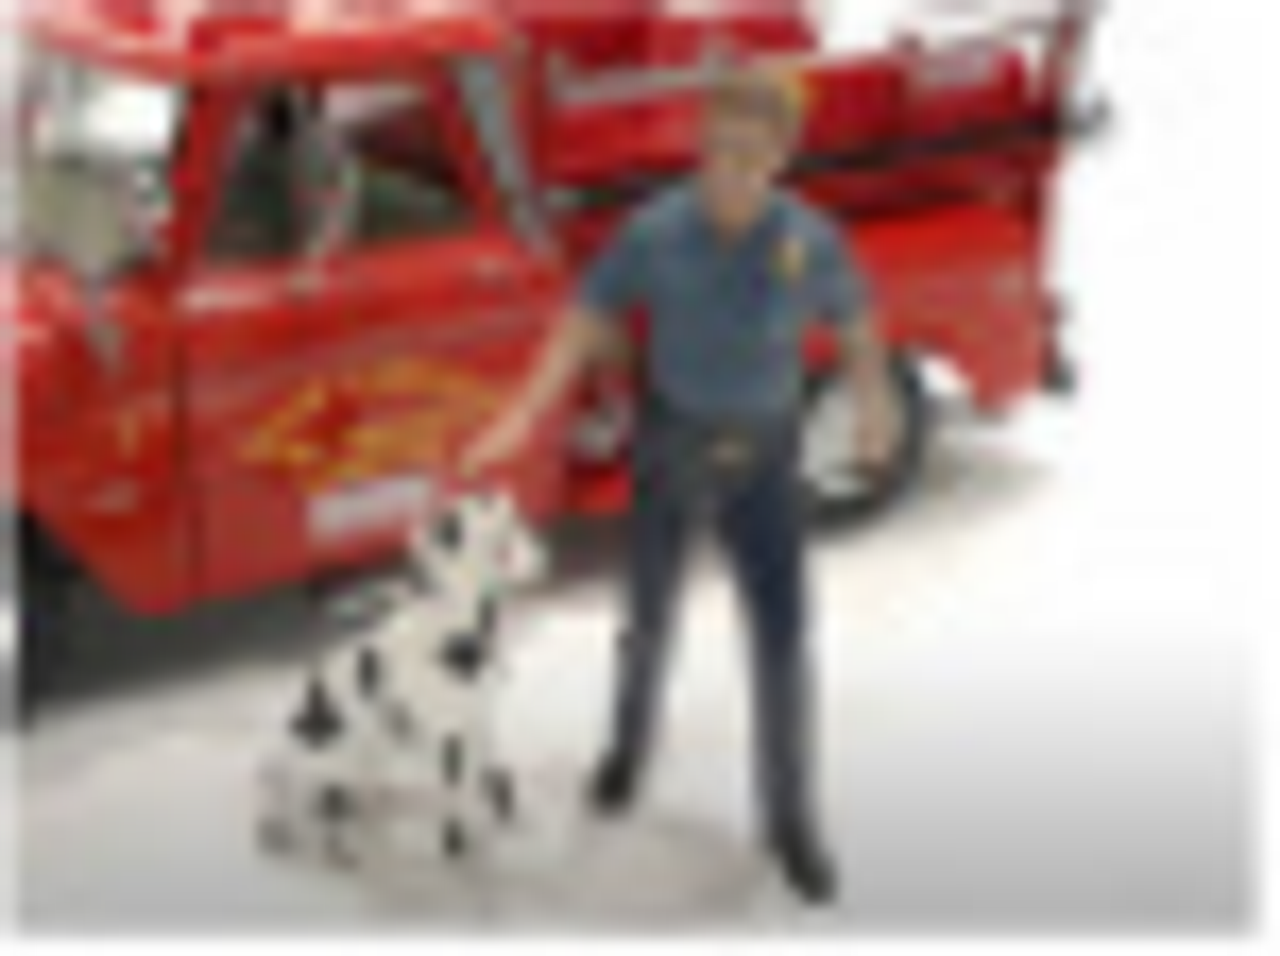 "Firefighters" Fire Dog Training Figures (Trainer and Dog) for 1/18 Scale Models by American Diorama